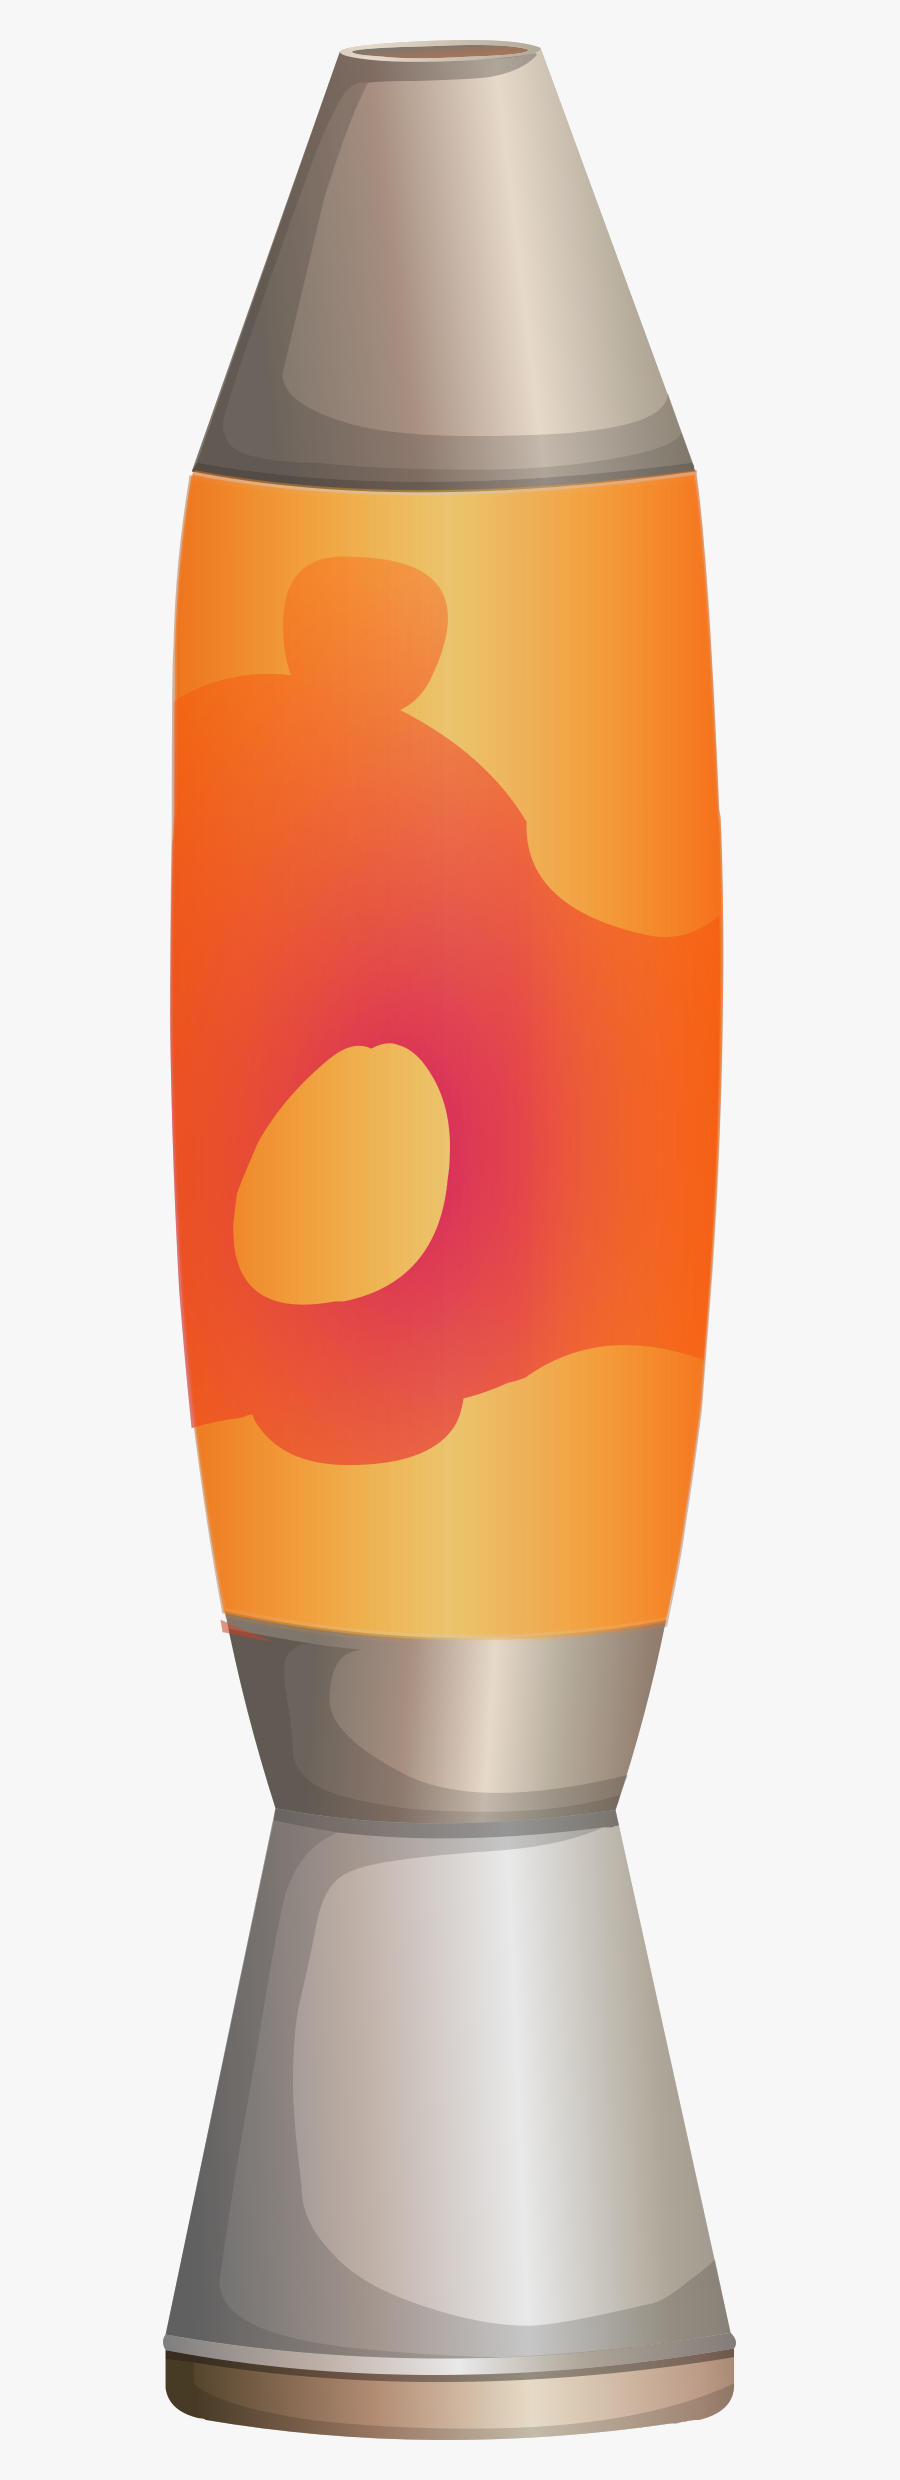 This Free Icons Png Design Of Lava Lamp From Glitch - Lava Lamp, Transparent Clipart